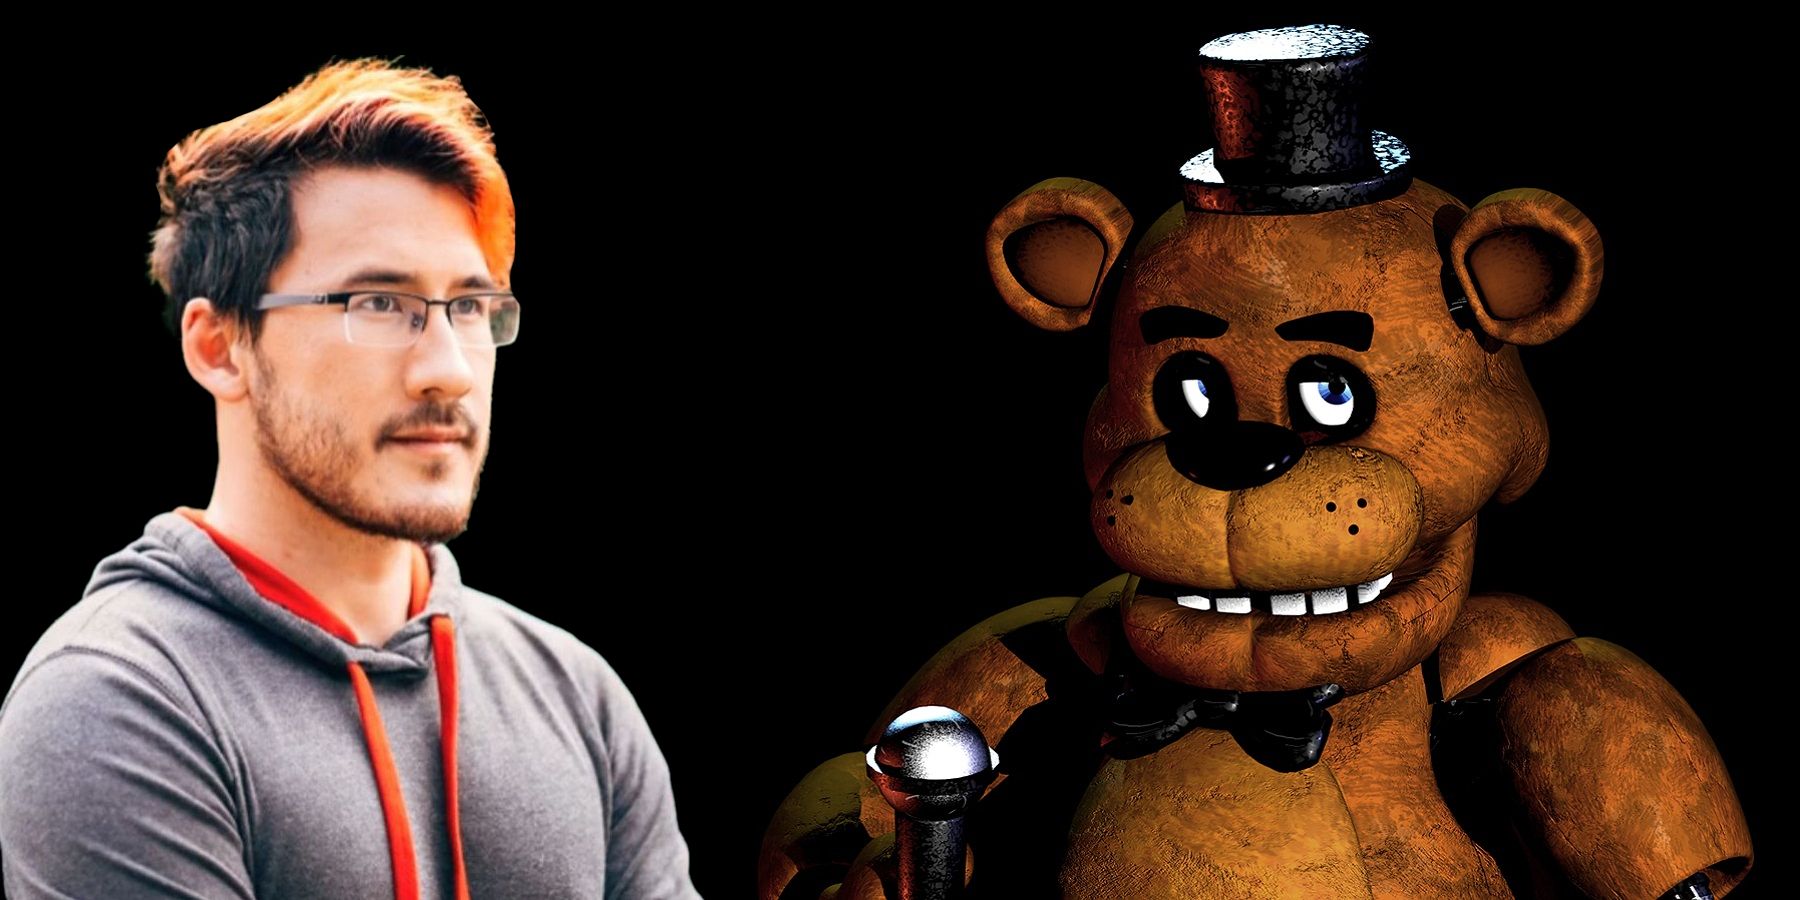 Image from Five Nights at Freddy's with YouTuber Markiplier to one side.